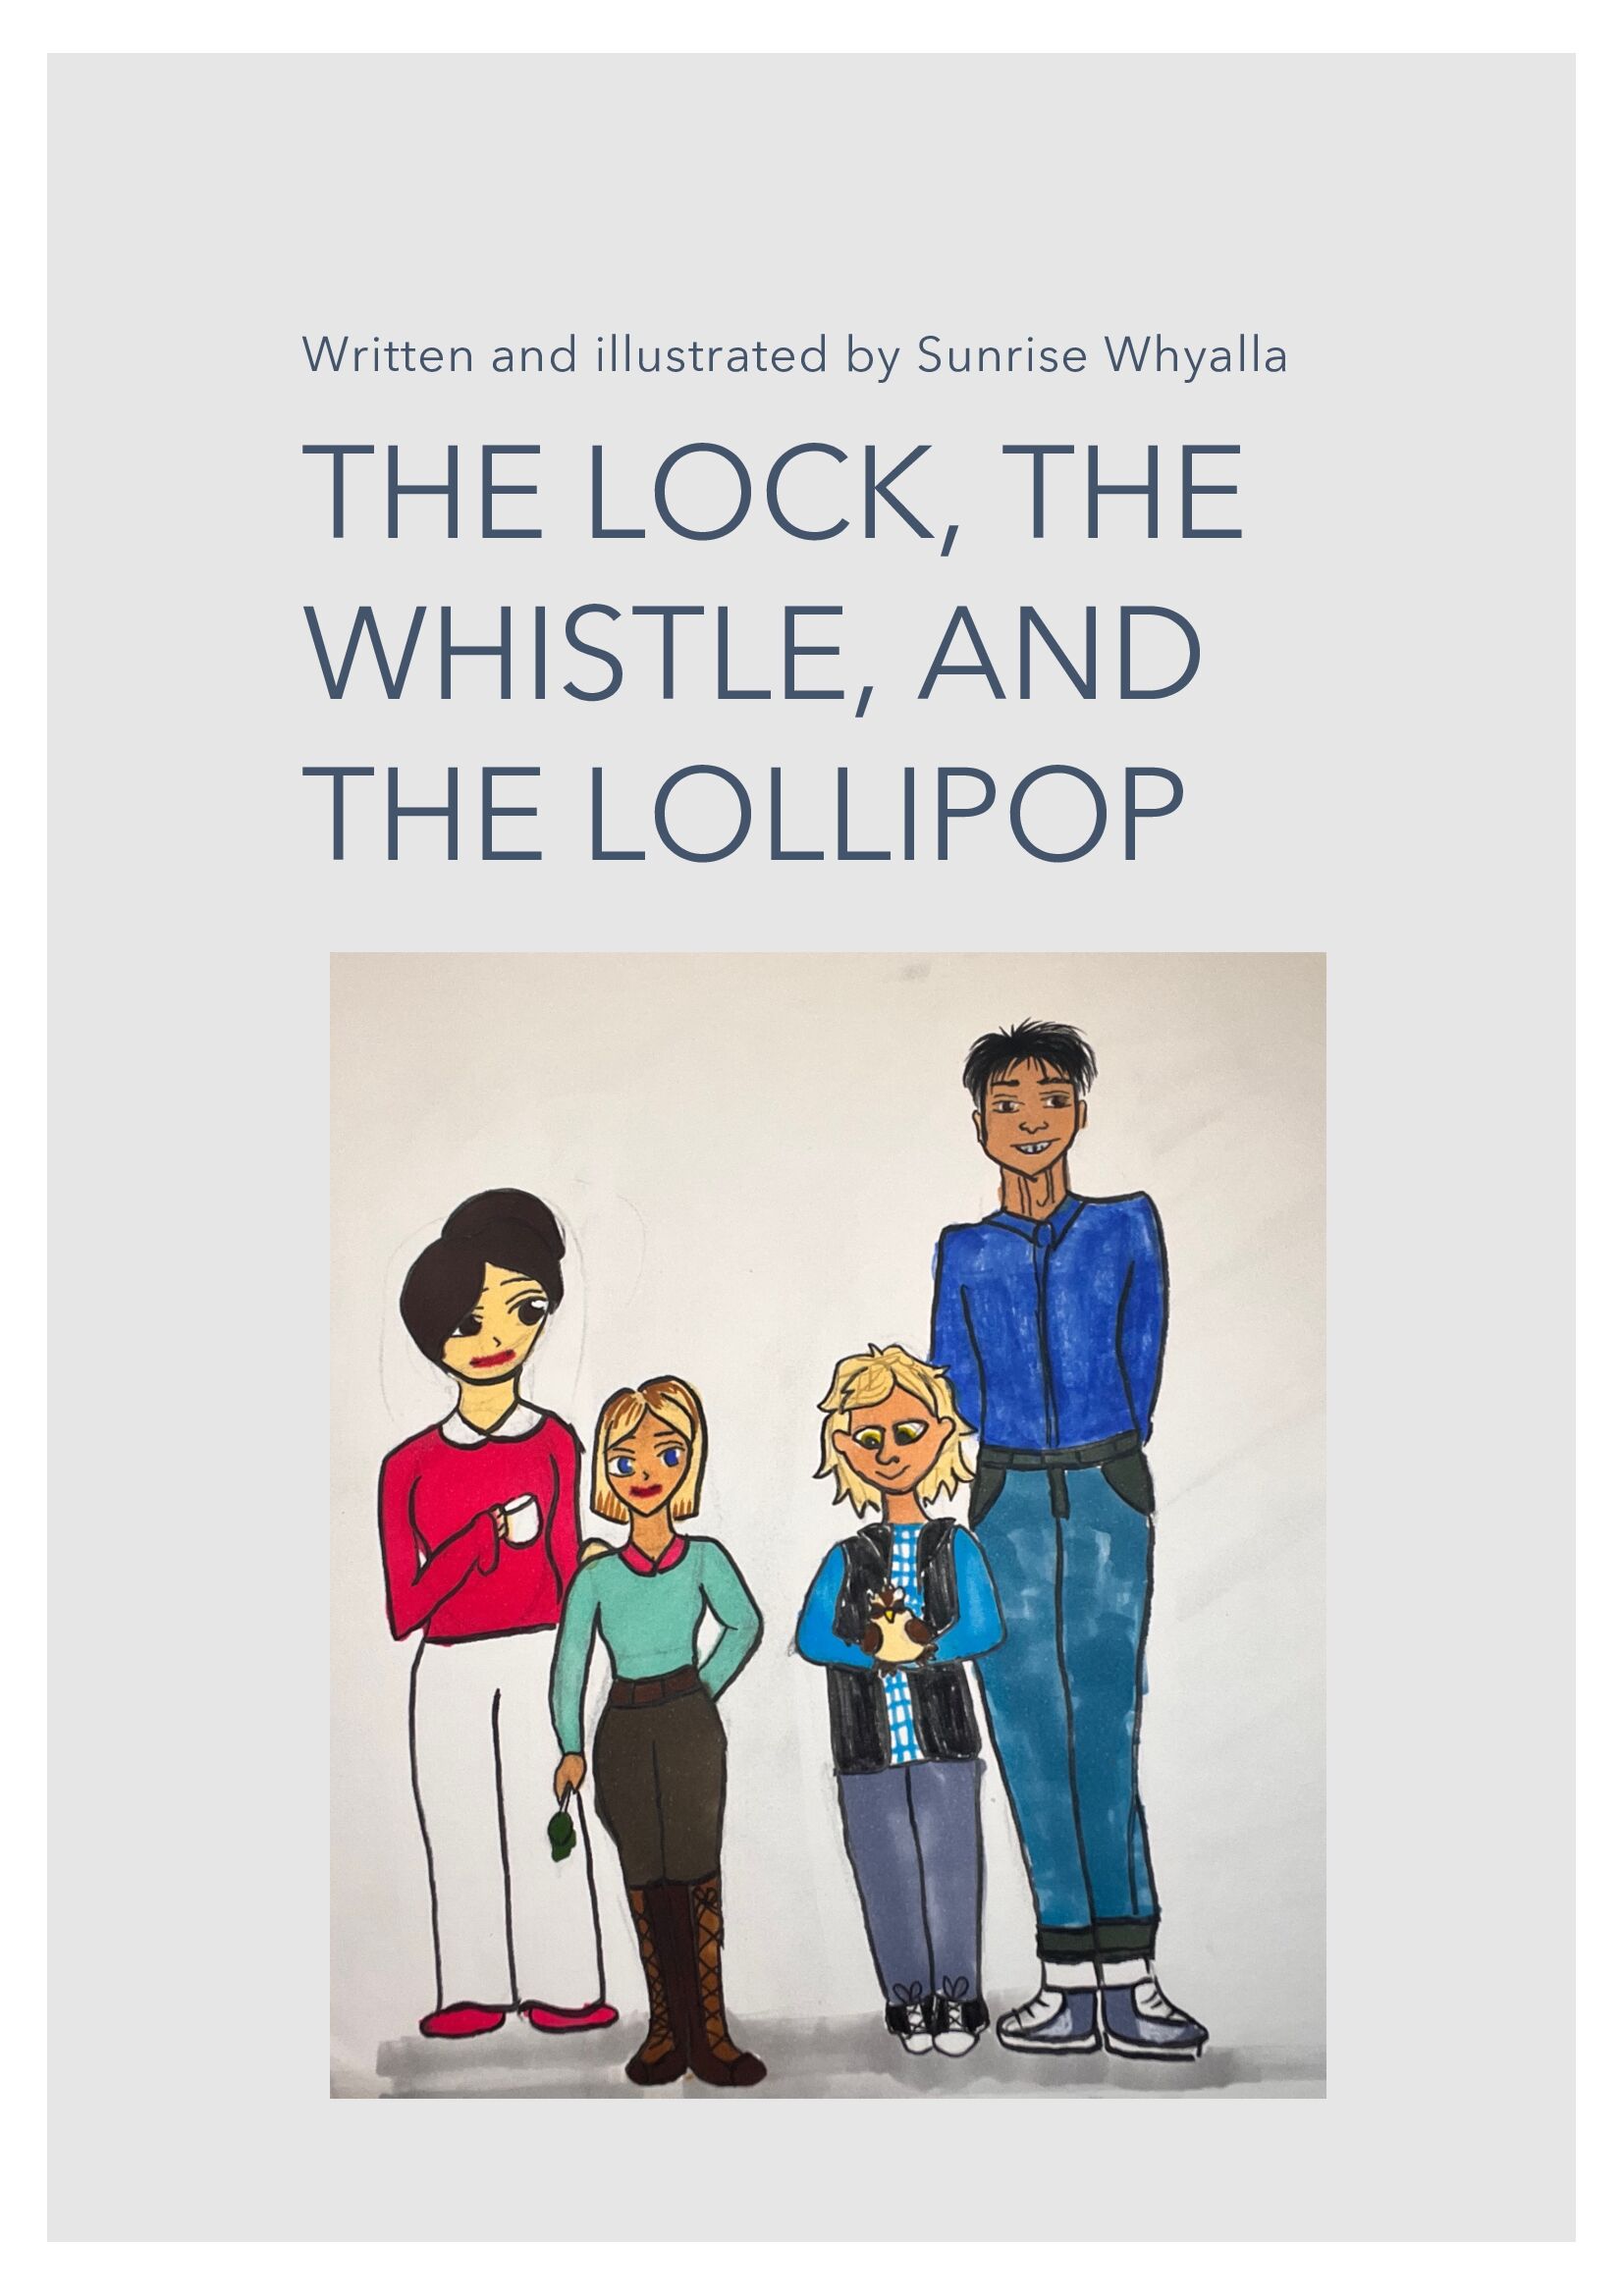 The Lock, The Whistle and The Lollipop